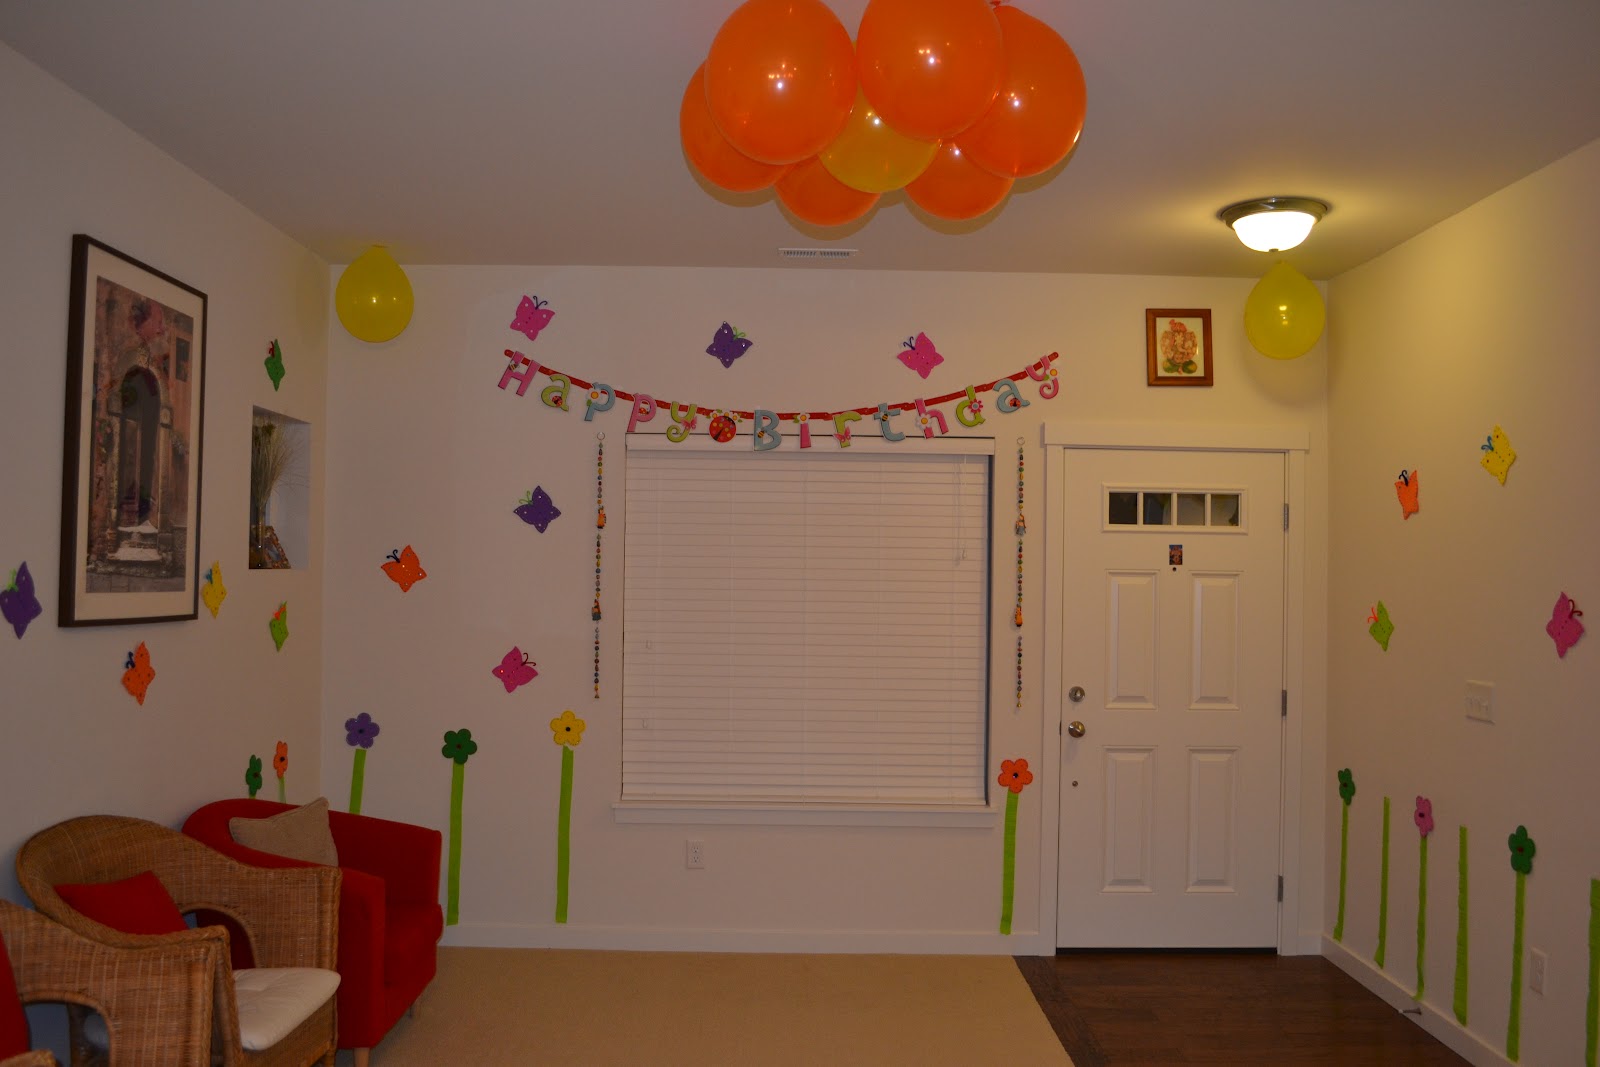 How to Decorate a Room for Birthday Party